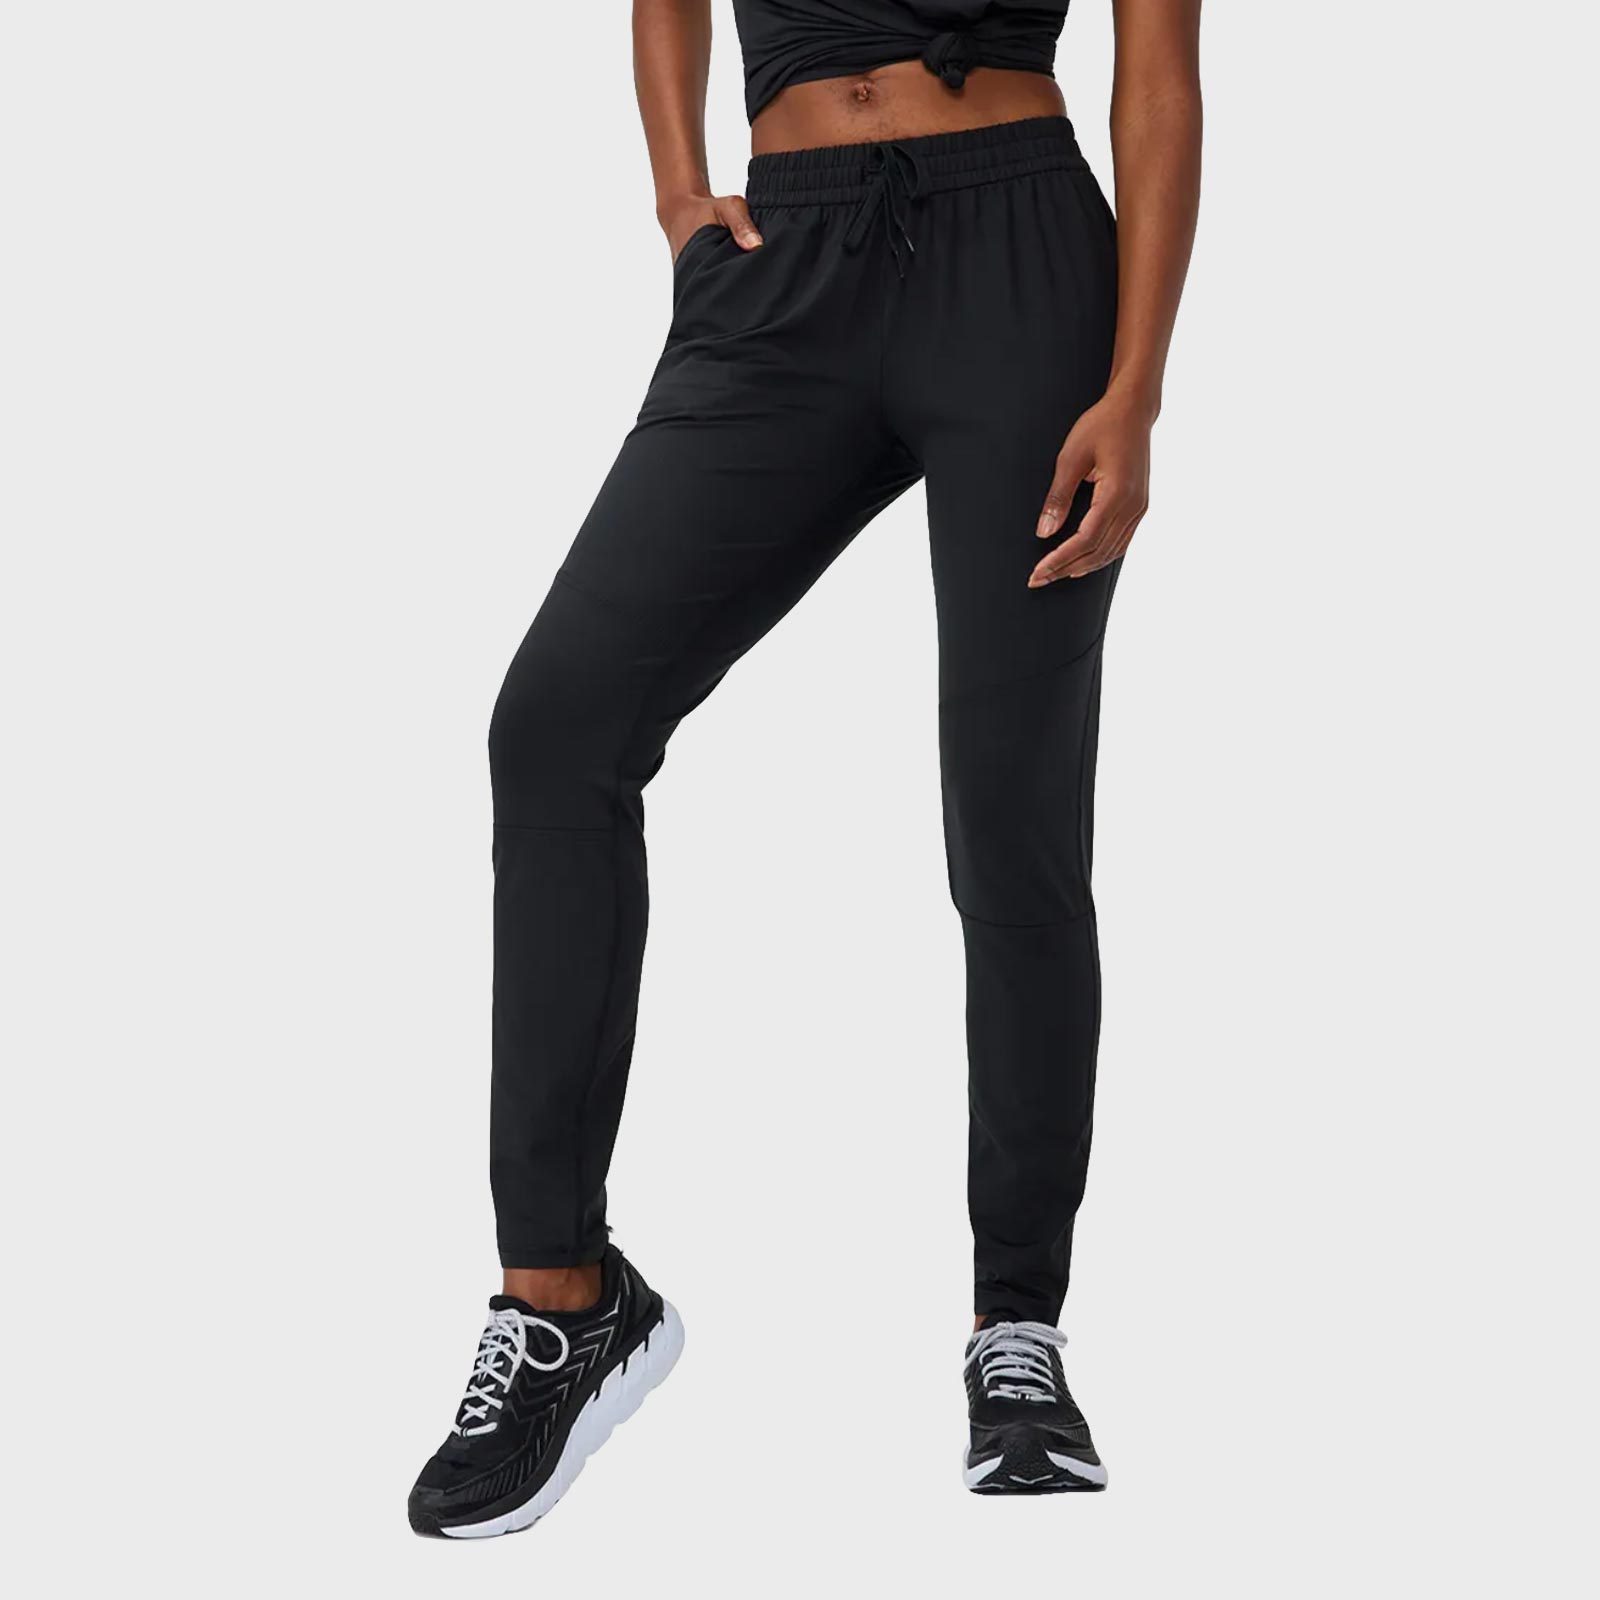 The 21 Best Sweatpants for Women You Won’t Want To Change Out Of